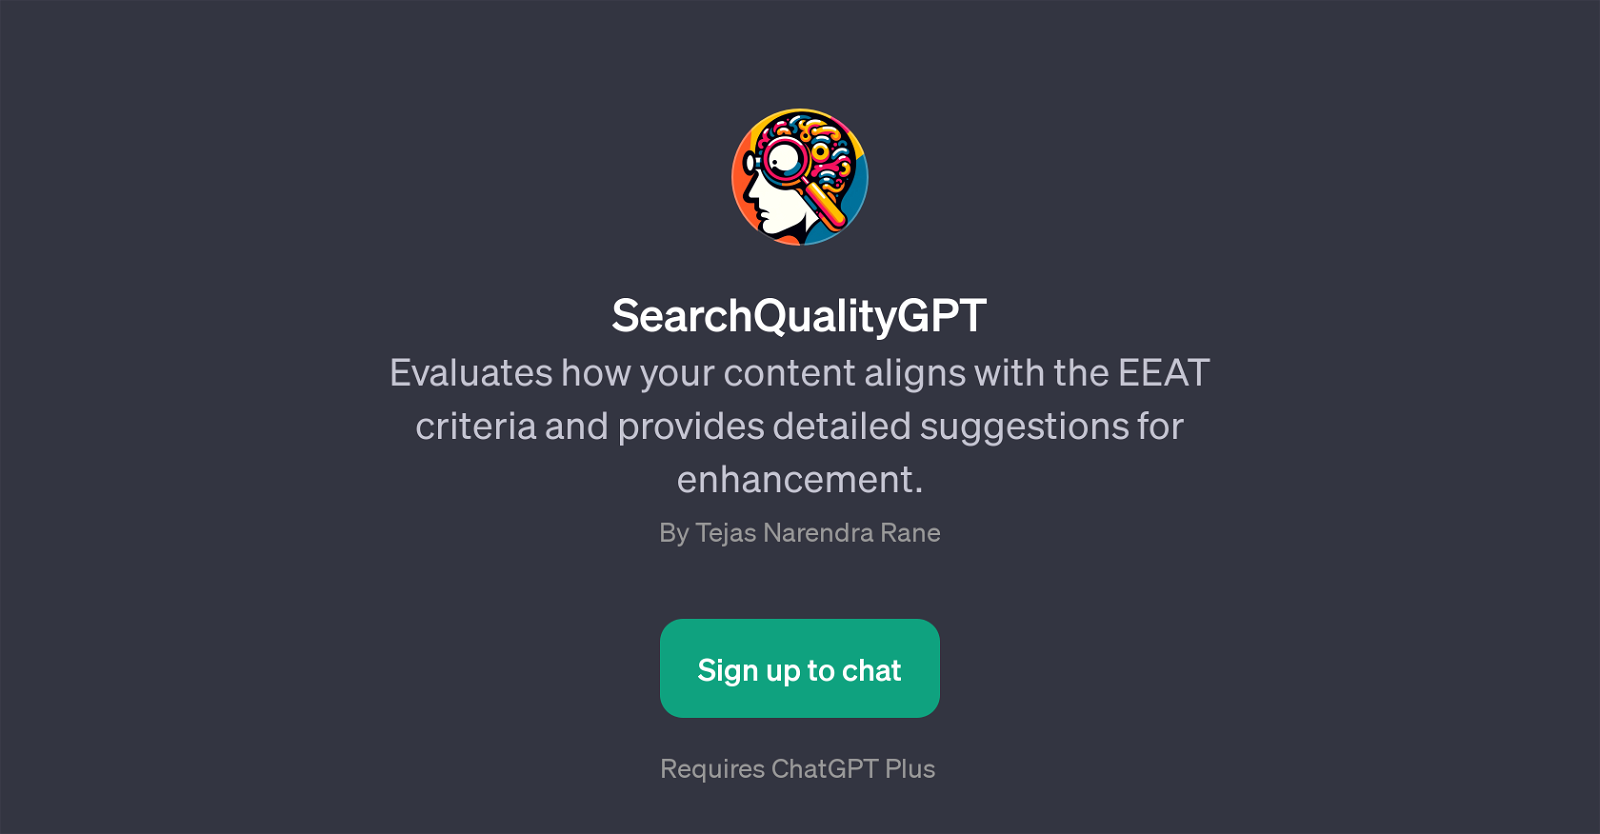 SearchQualityGPT website